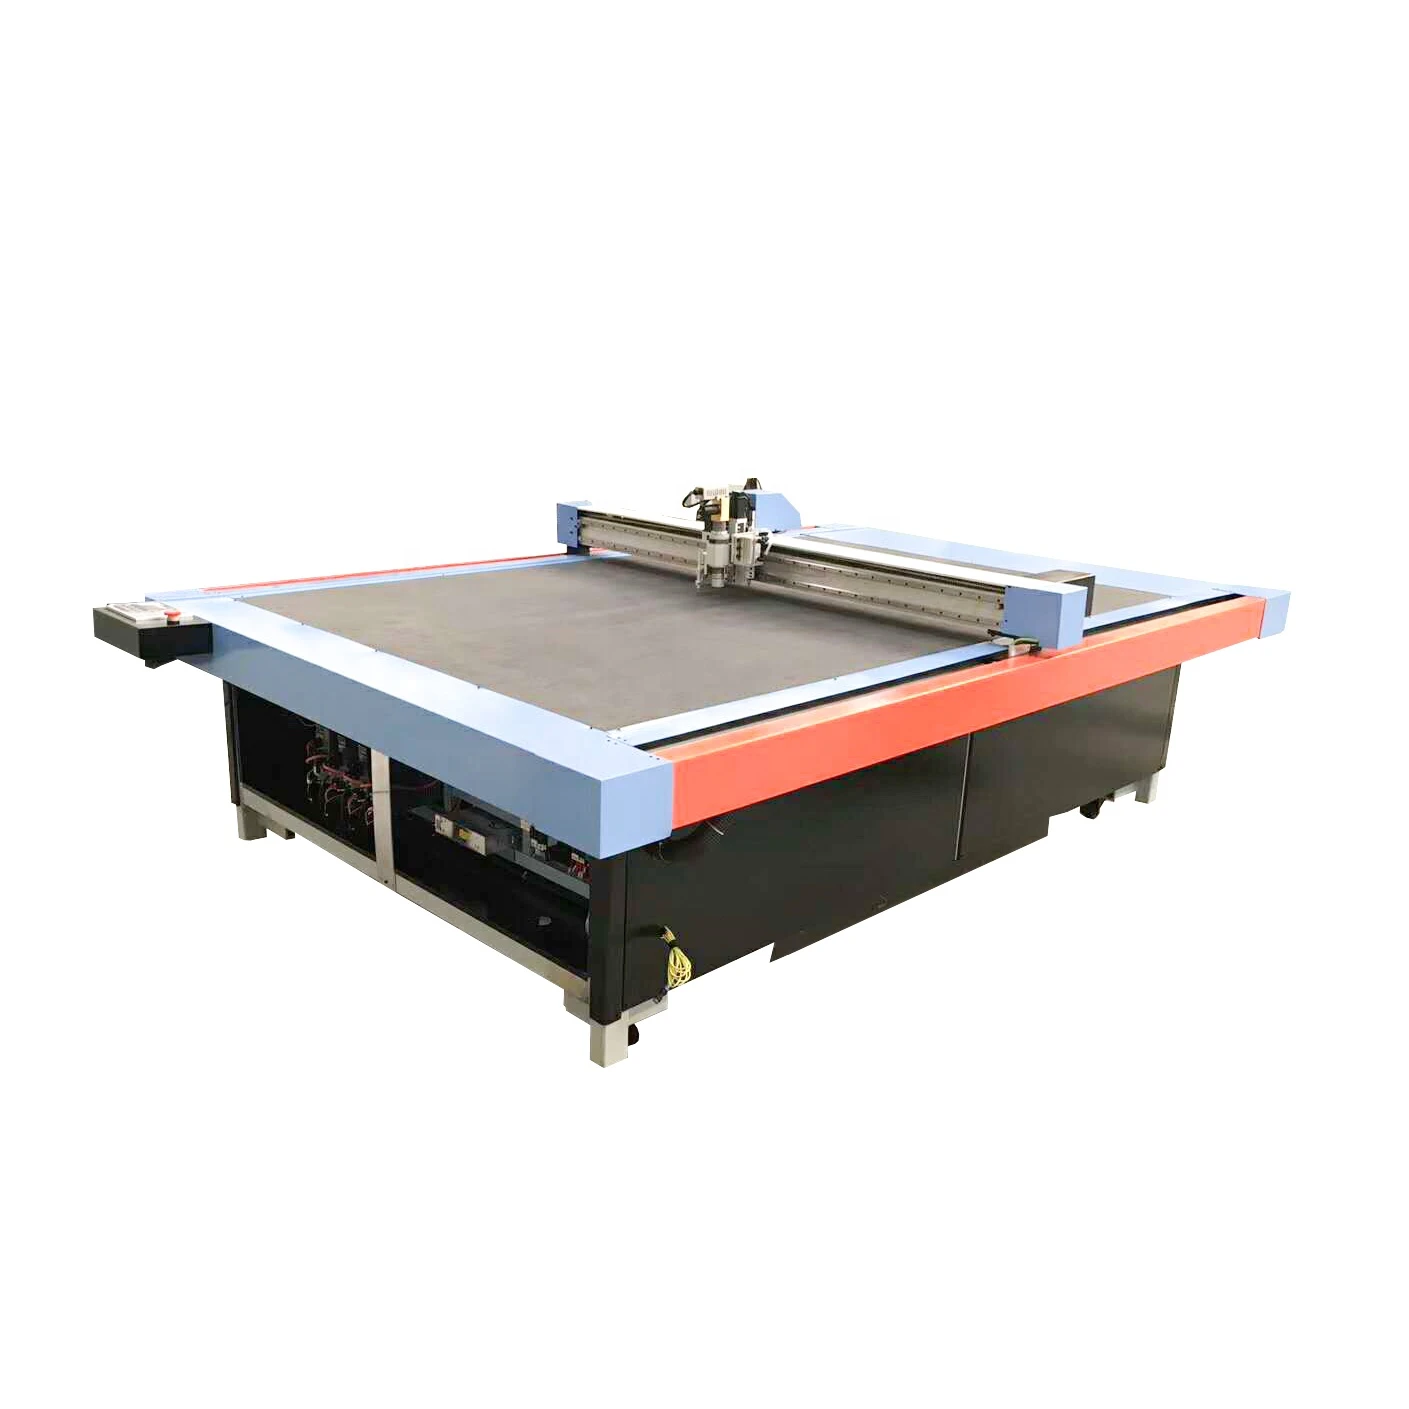 1625 knife cutting leather production machinery Knife Oscillating Blade Cutting Machine cloth Leather